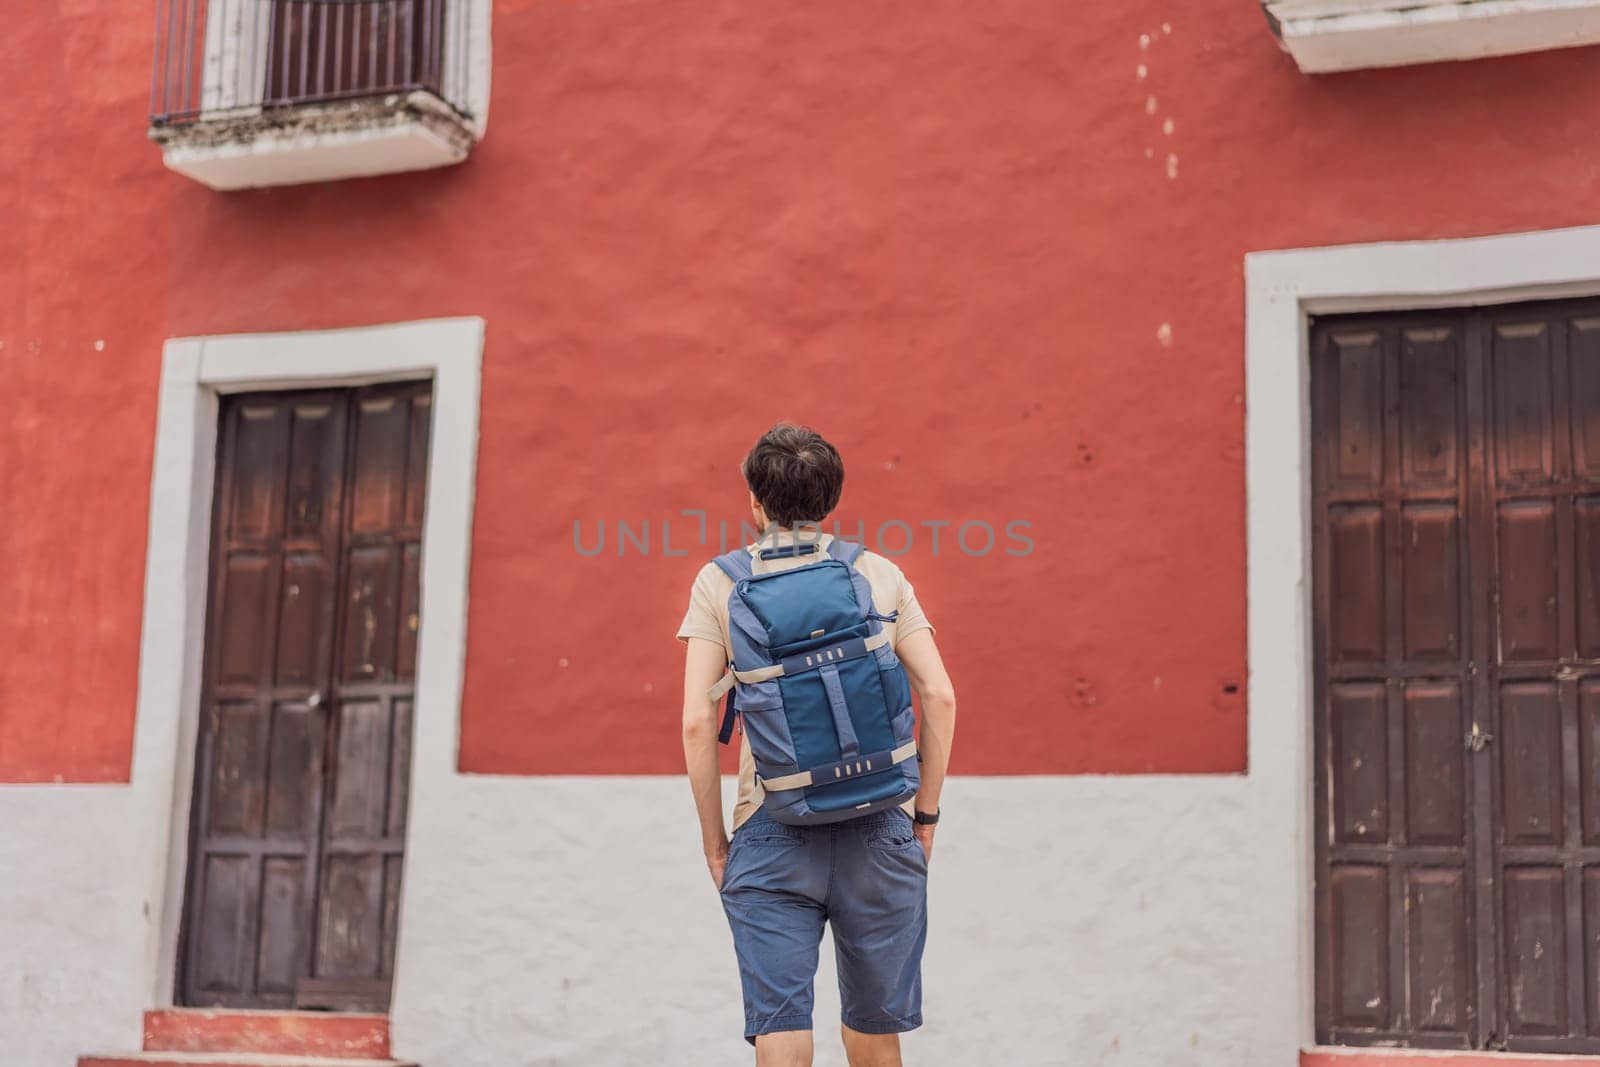 Man tourist explores the vibrant streets of Valladolid, Mexico, immersing herself in the rich culture and colorful architecture of this charming colonial town by galitskaya